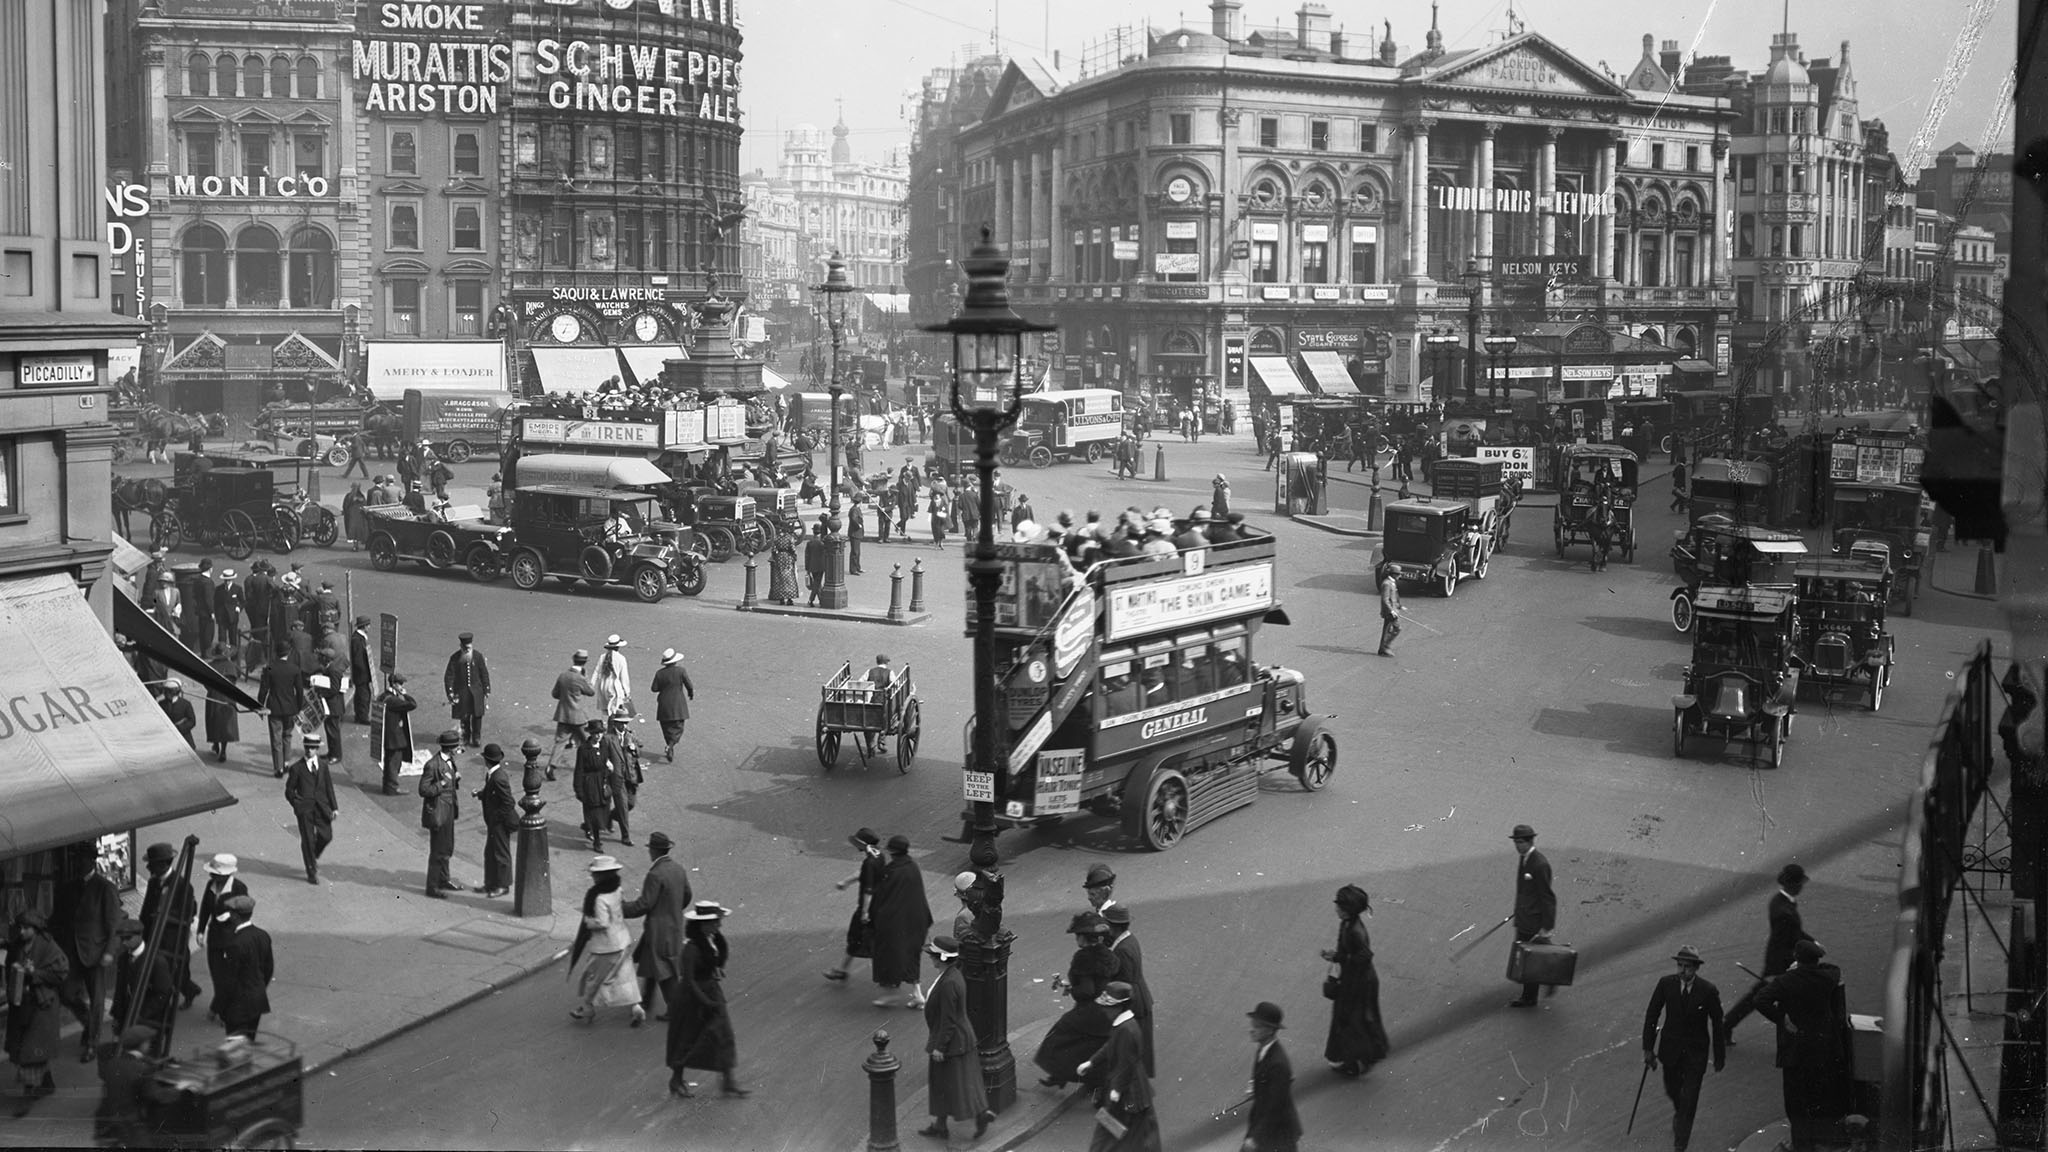 A busy street scene with pedestrians, buses and other vintage vehicles.